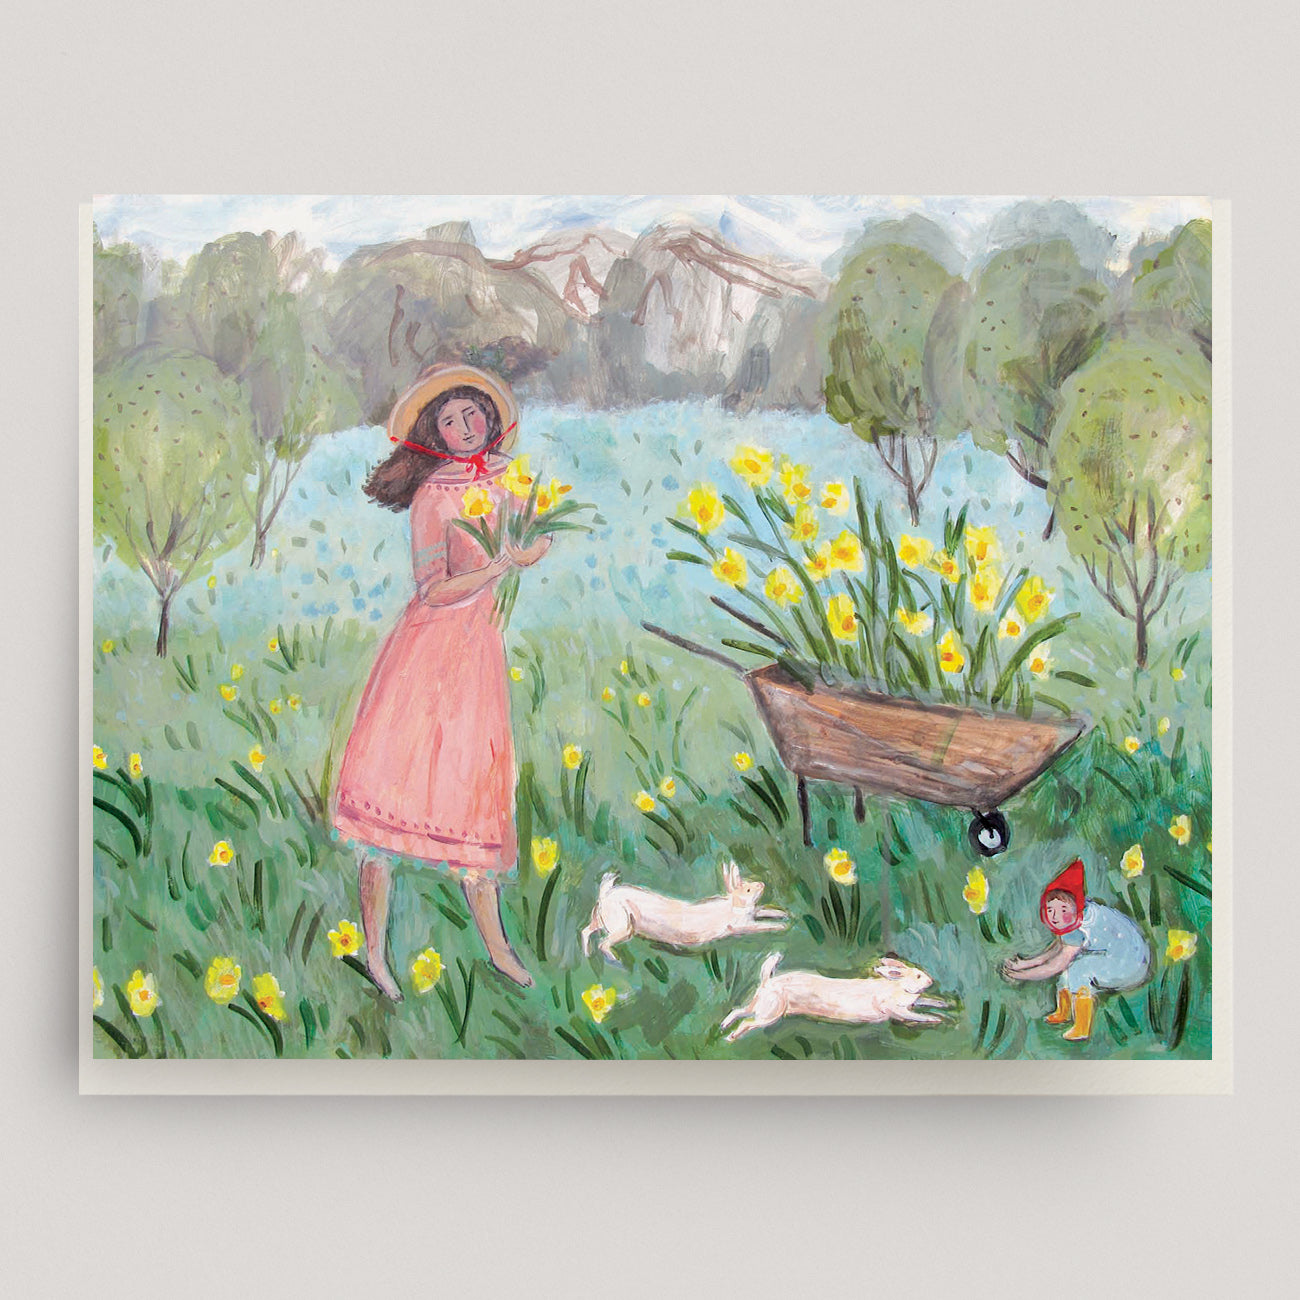 Greeting card of a woman and her child in a field of flowers with mountains in the background. Ingrid Press, made in the USA.